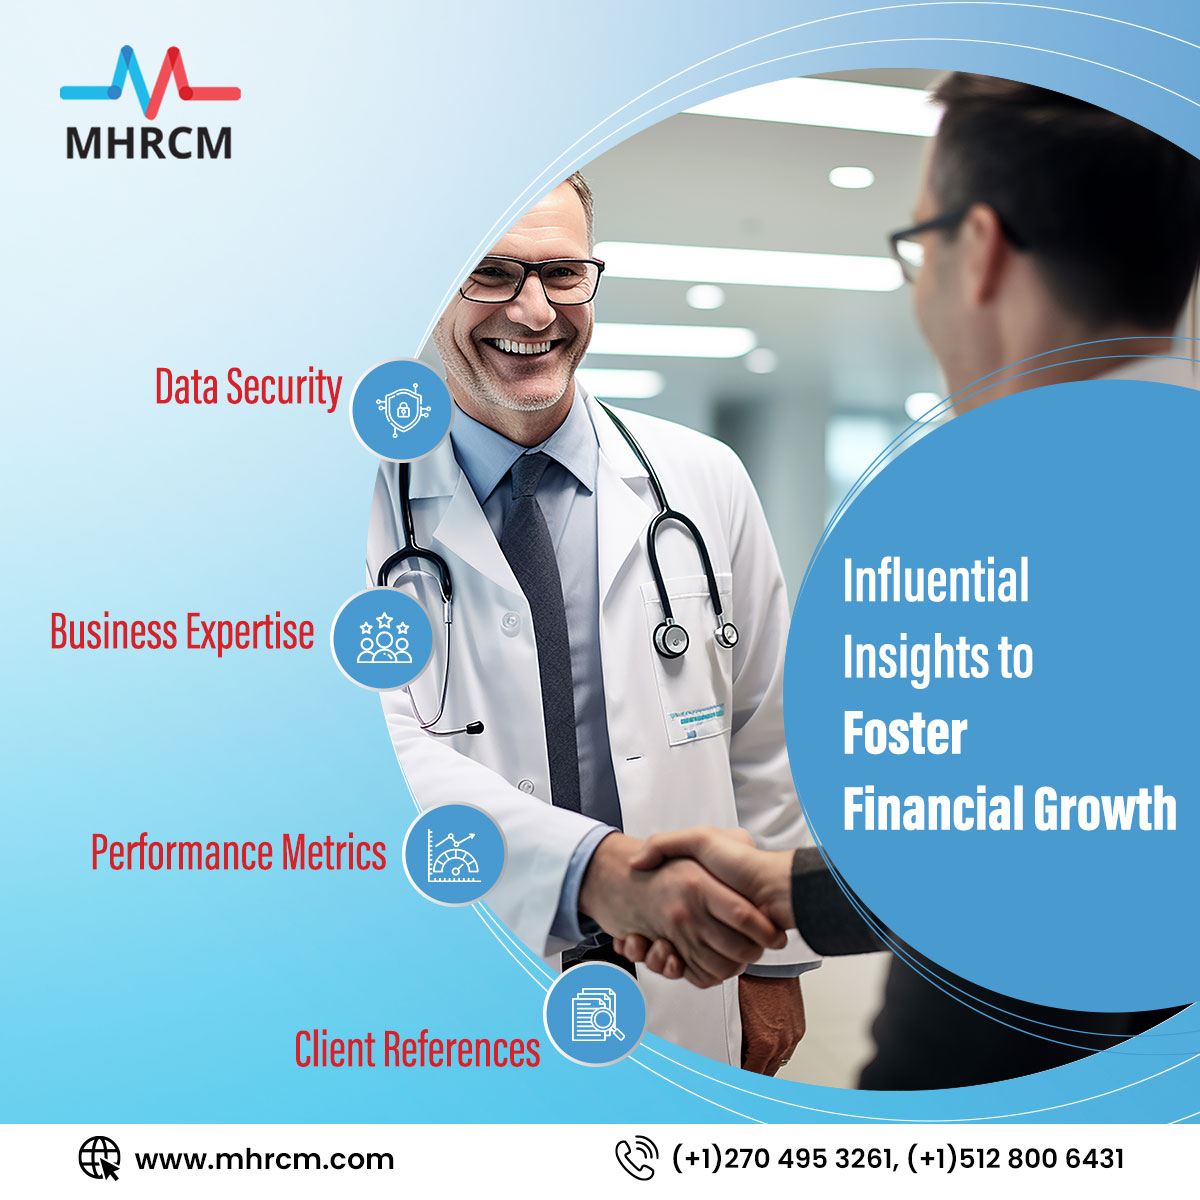 Are you struggling in choosing the right RCM solution? Make informed decisions with our expert tips such as checking the experience in healthcare RCM, validating data security to avoid legal issues, assessing the performance with metrics and evaluating the RCM reputation. #MHRCM